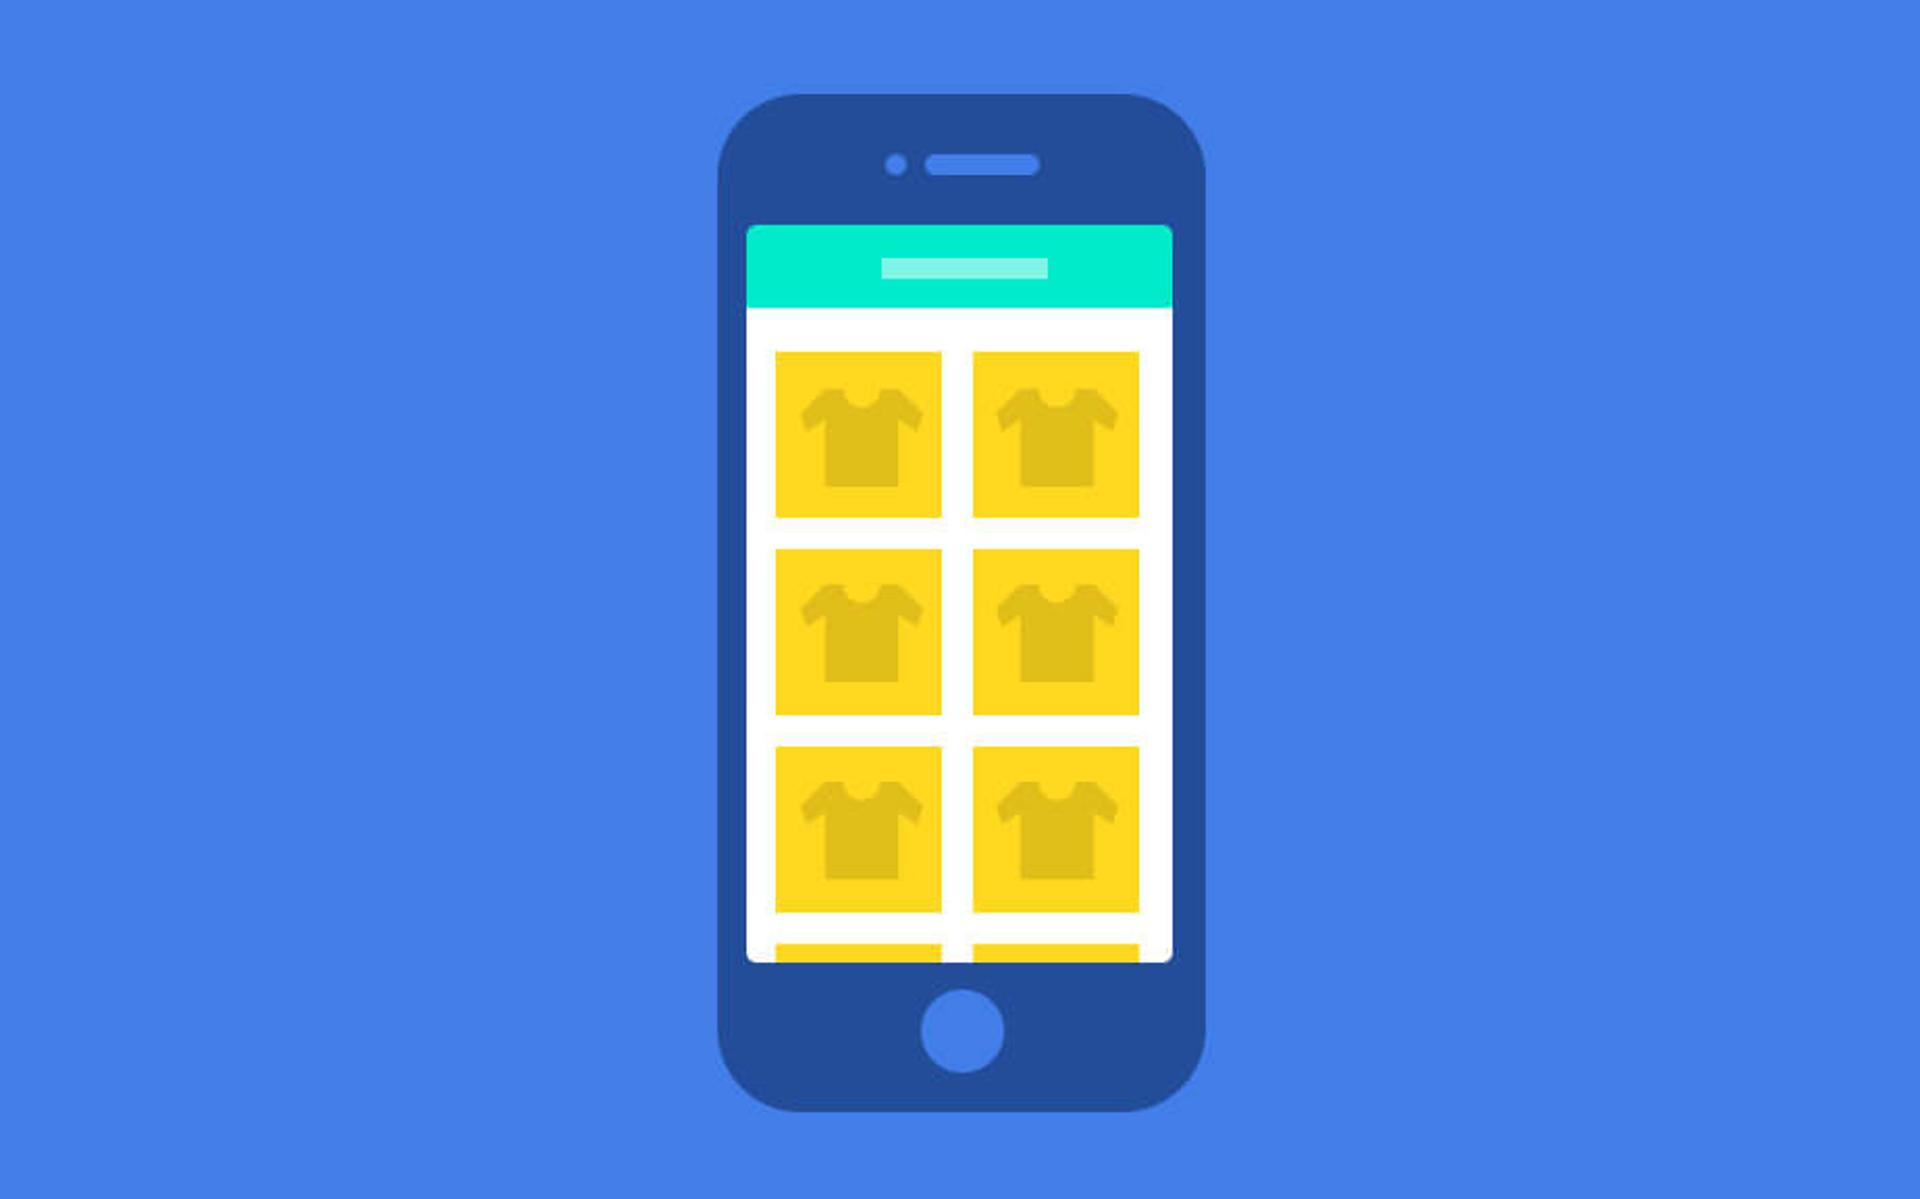 5 UX tweaks to improve mobile shopping experience